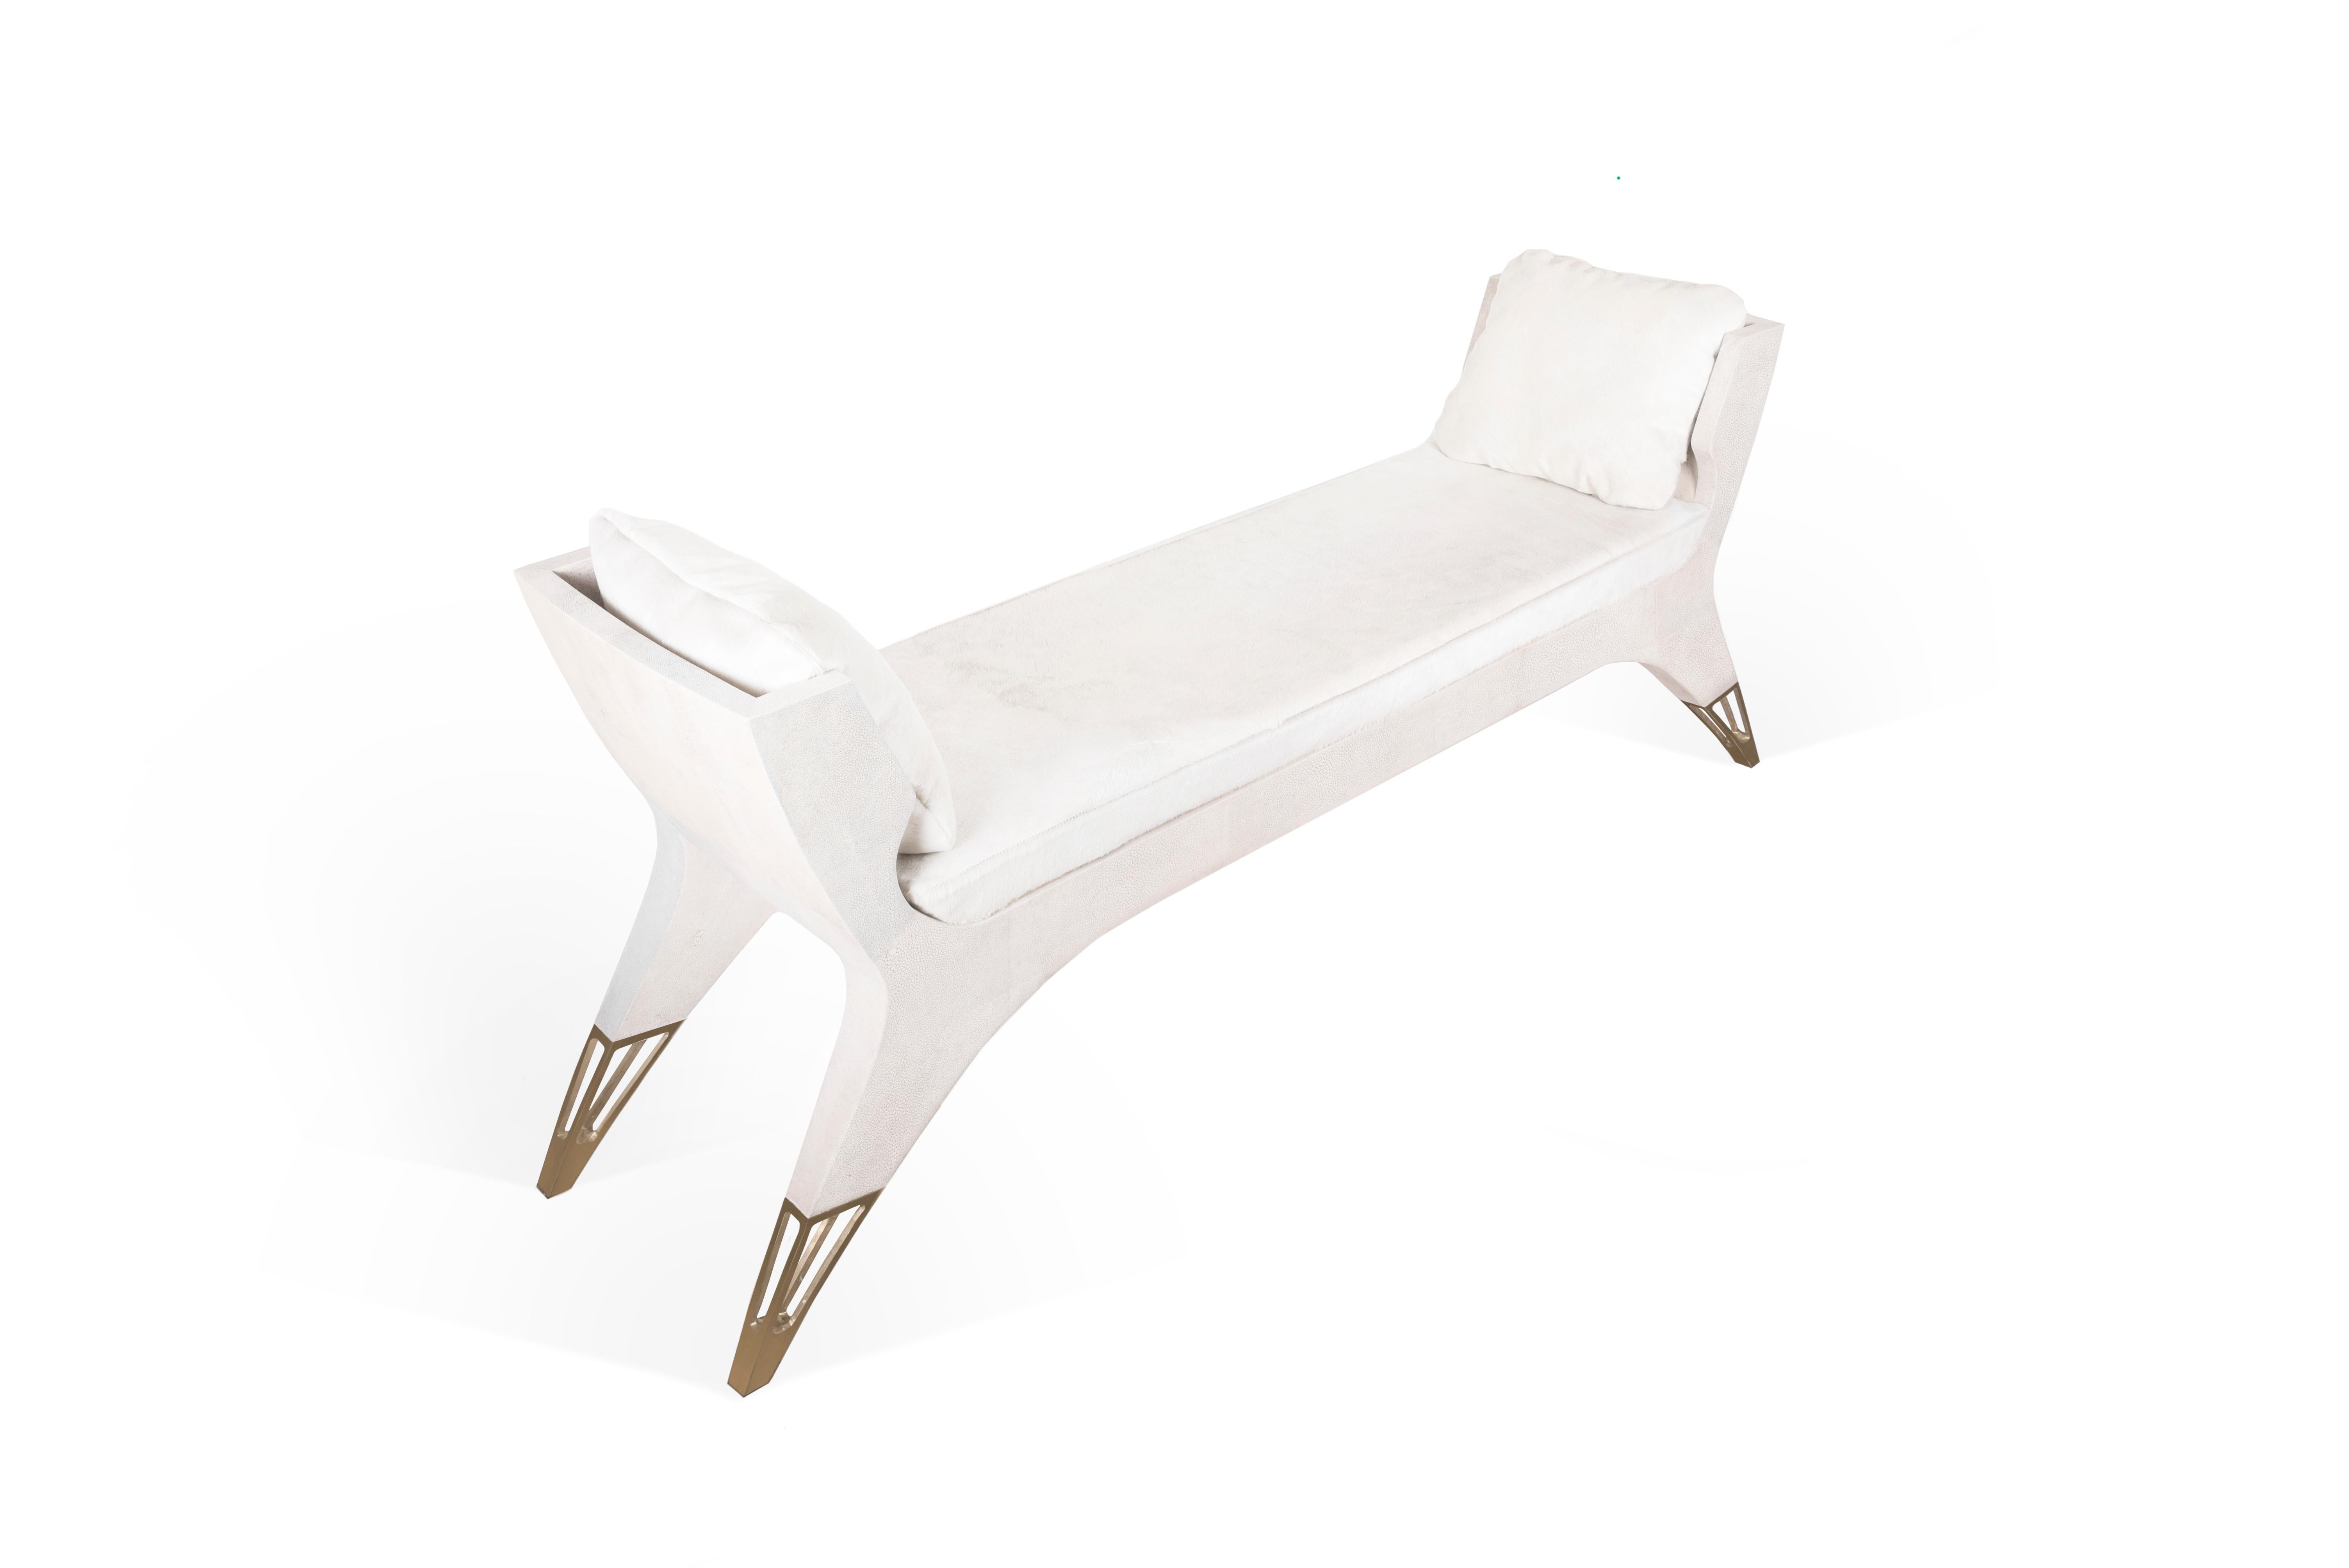 The Lord bench is an invitation to as the French would say, “rêveries”. The cream shagreen adds as touch of elegant drama. The perfect piece for a dressing room, entrance or living room. The soft cushions in cream horse hair are the final touch of